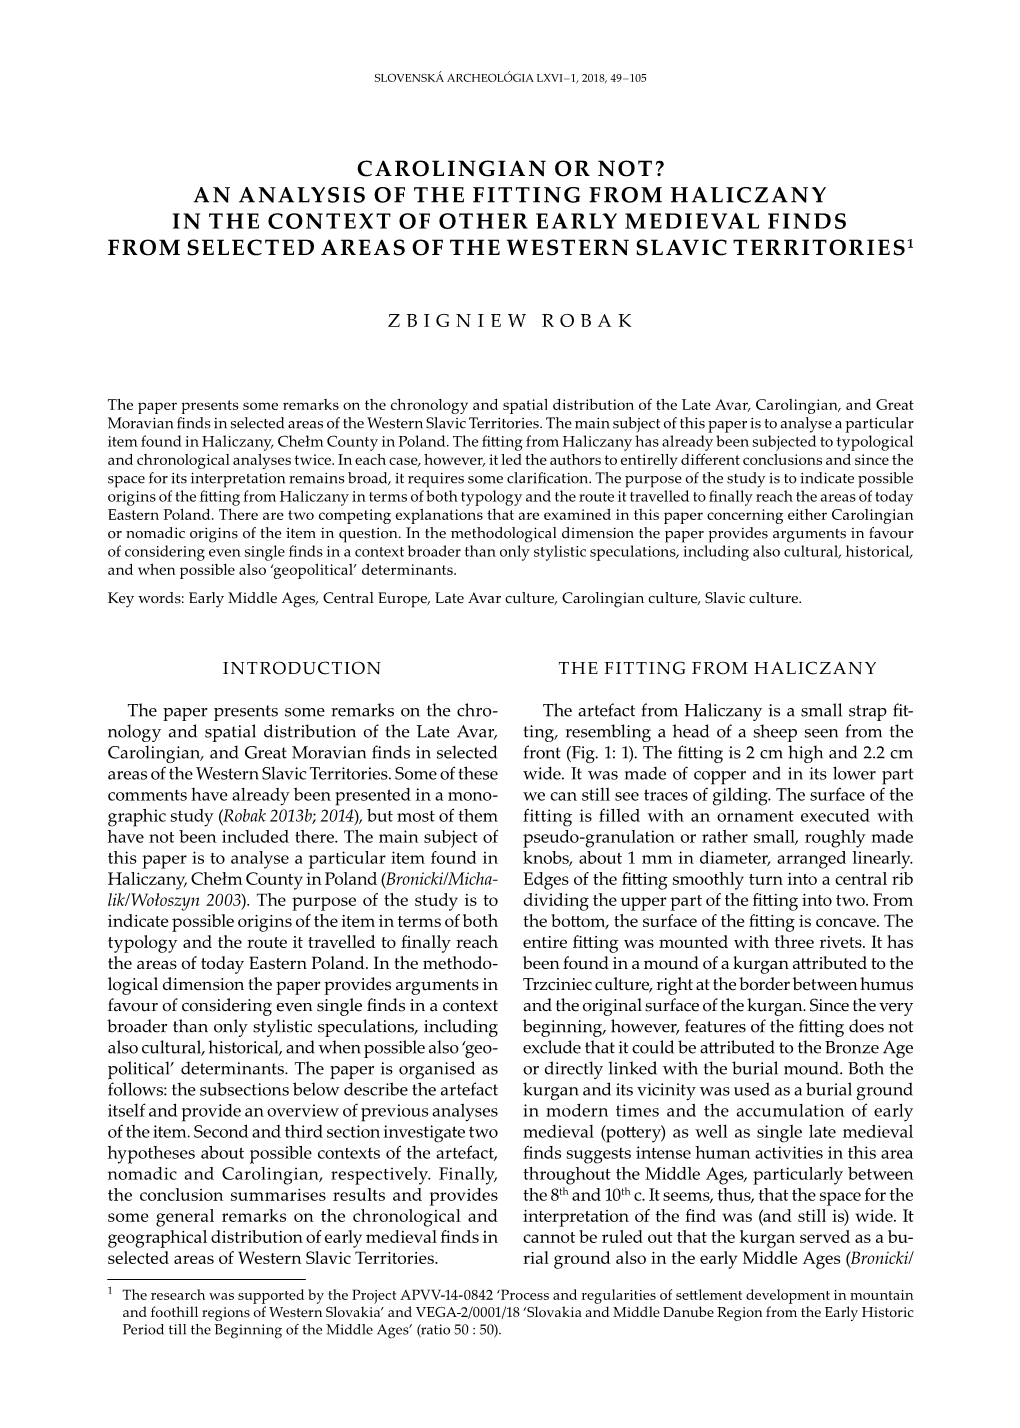 An Analysis of the Fitting from Haliczany in the Context of Other Early Medieval Finds from Selected Areas of the Western Slavic Territories1